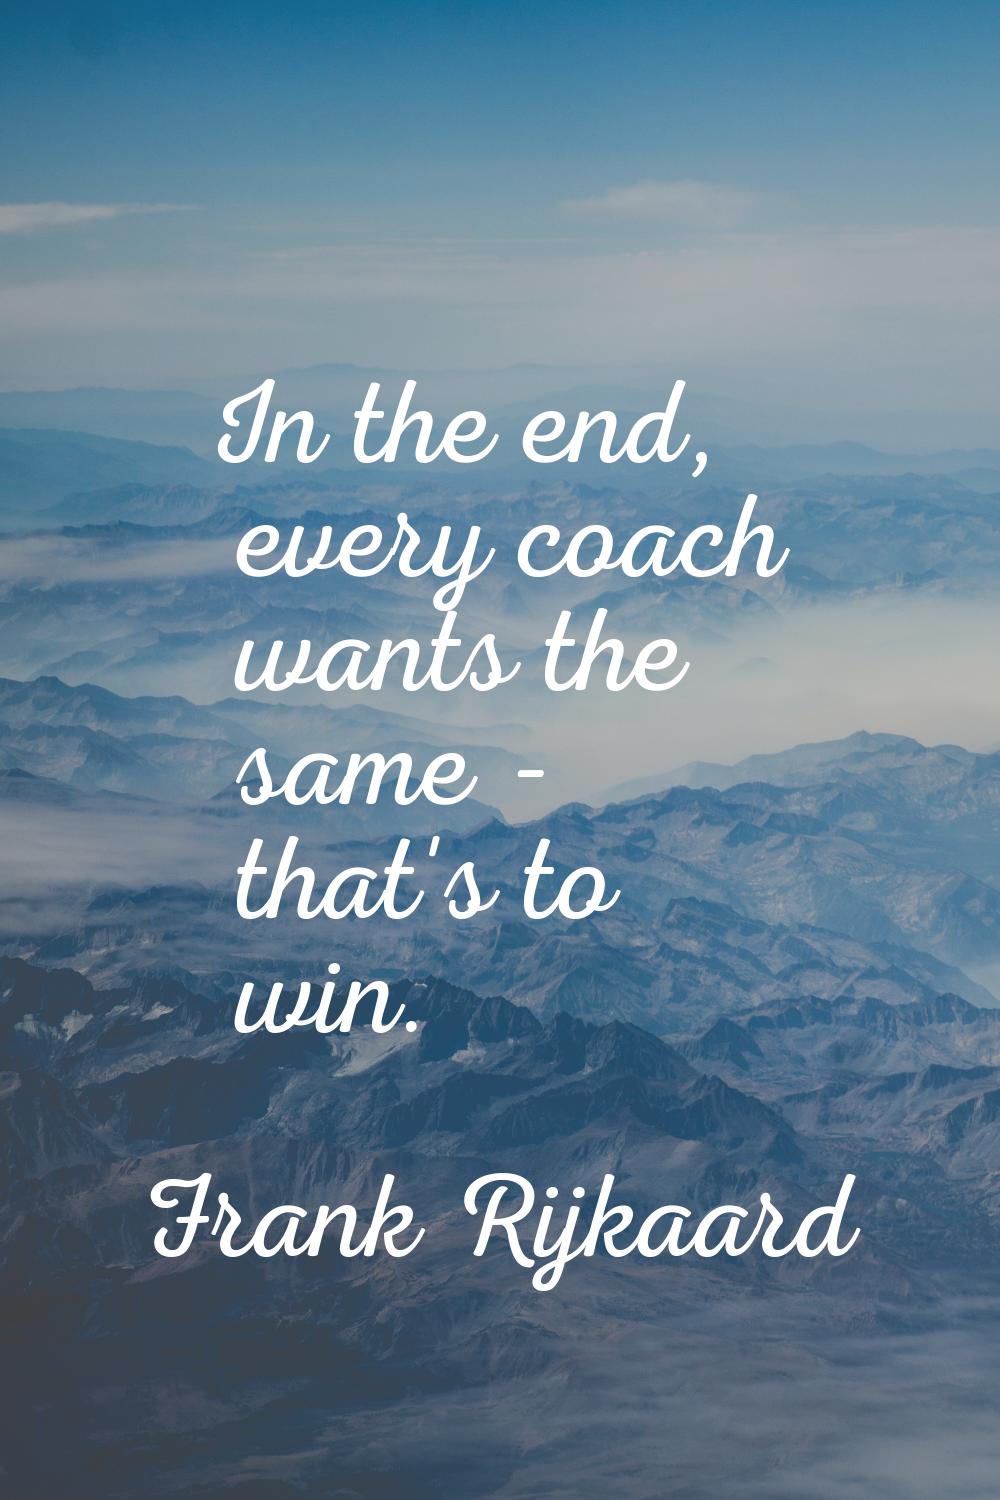 In the end, every coach wants the same - that's to win.